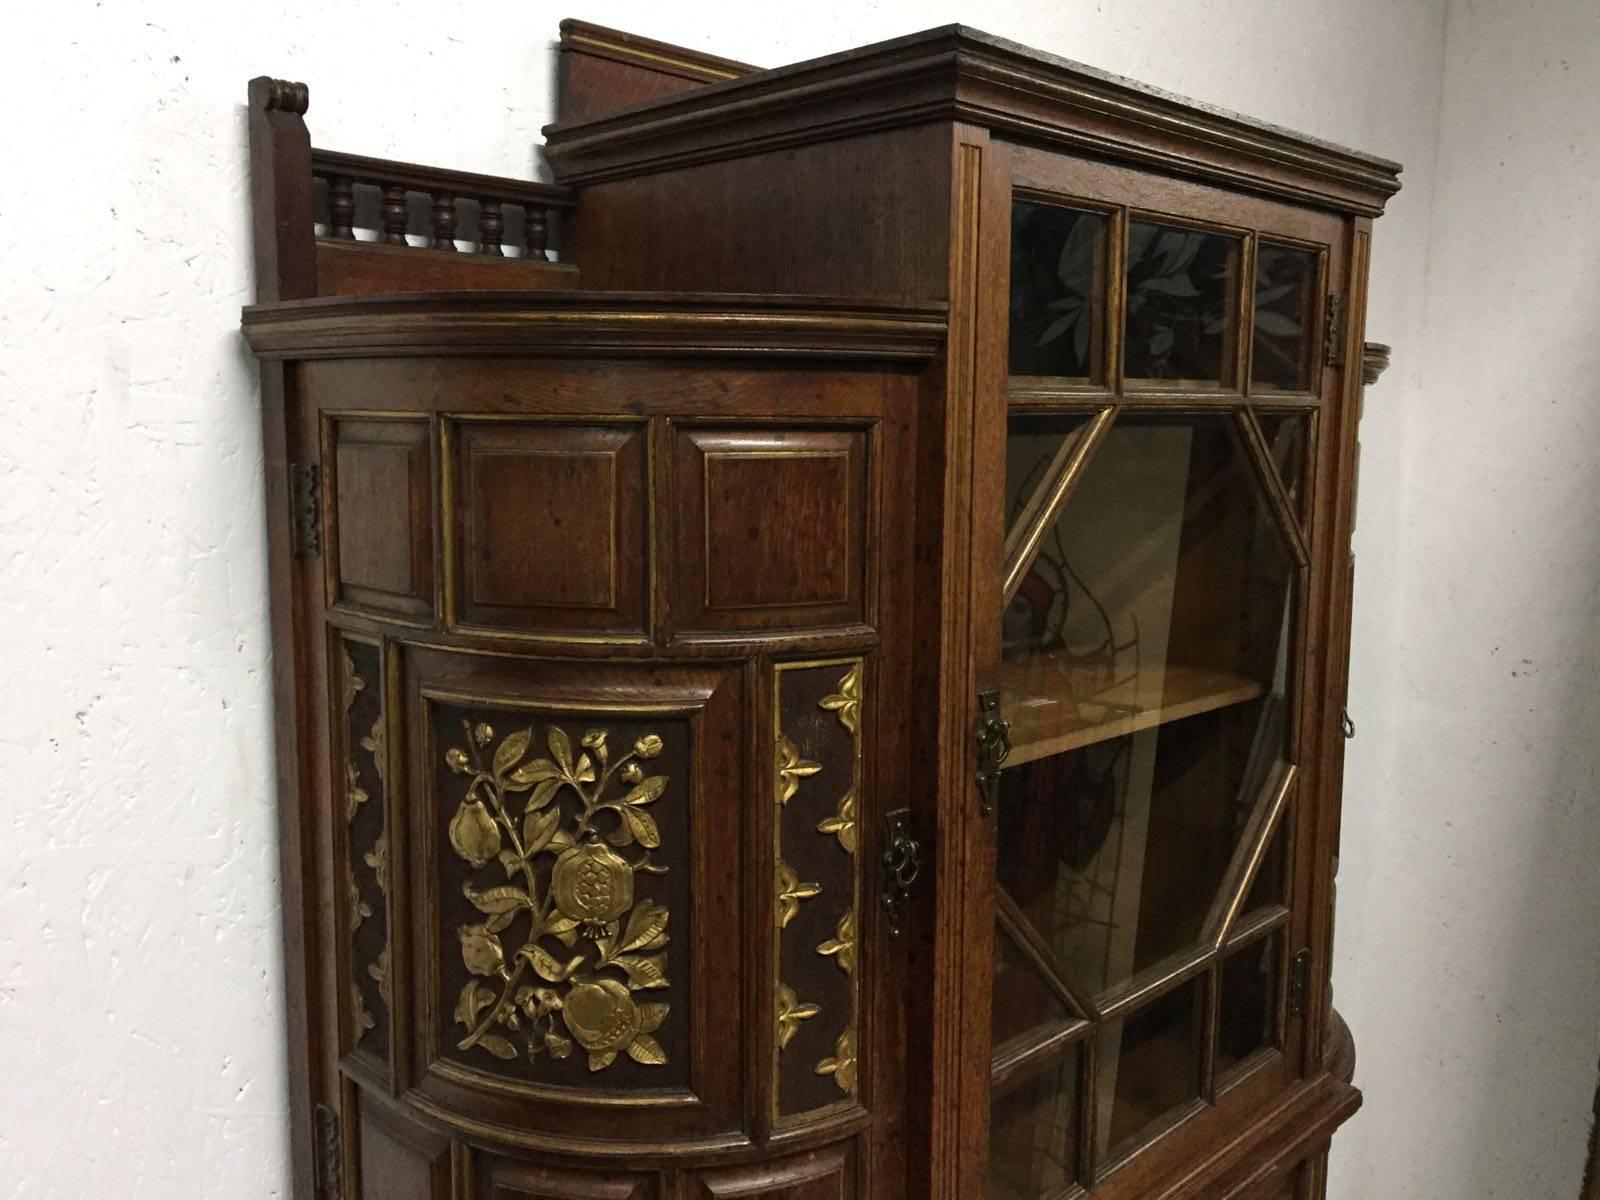 Bruce Talbert for Gillows attri, A Fine Aesthetic Movement Oak & Glazed Cabinet In Good Condition For Sale In London, GB